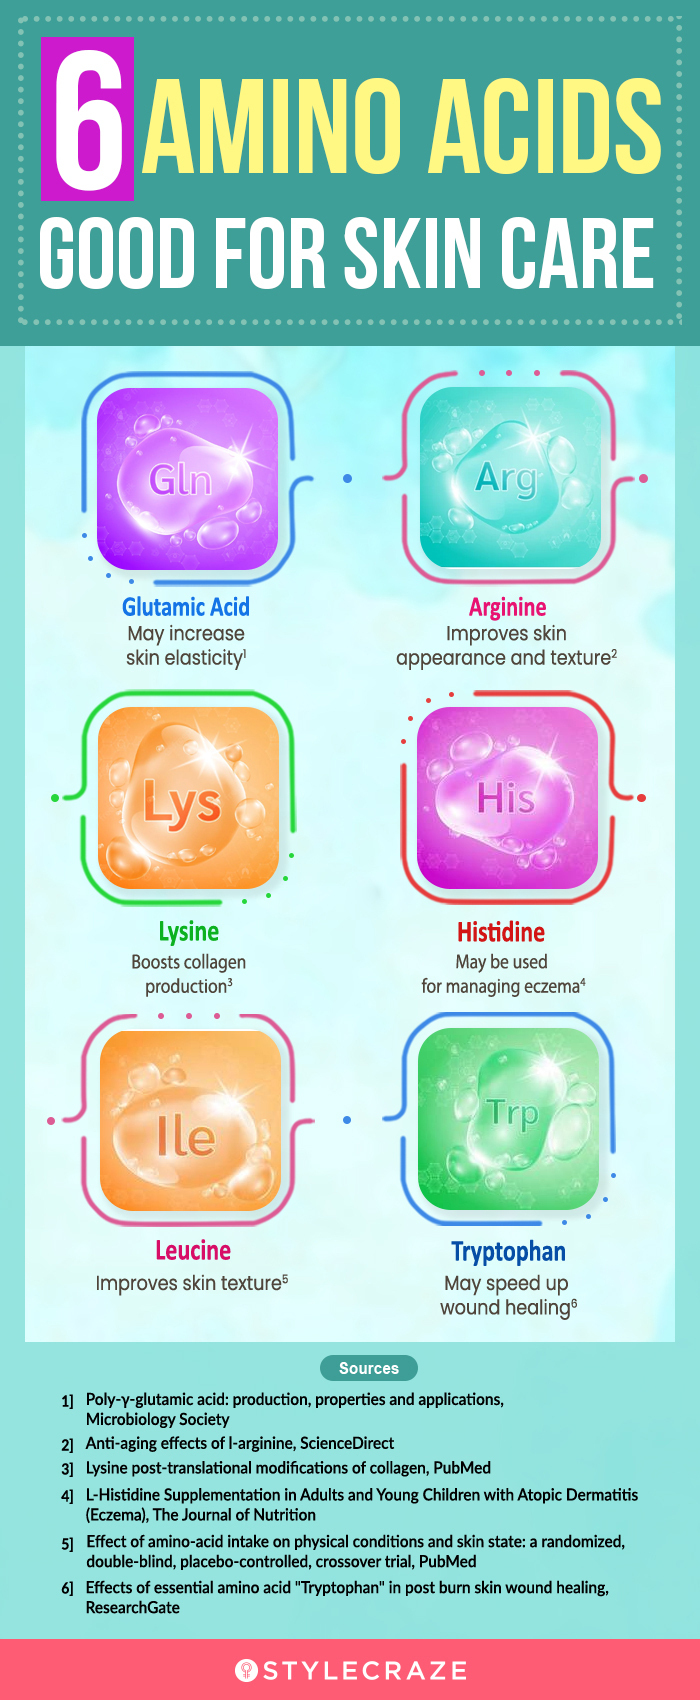 6 amino acids good for skin care [infographic]